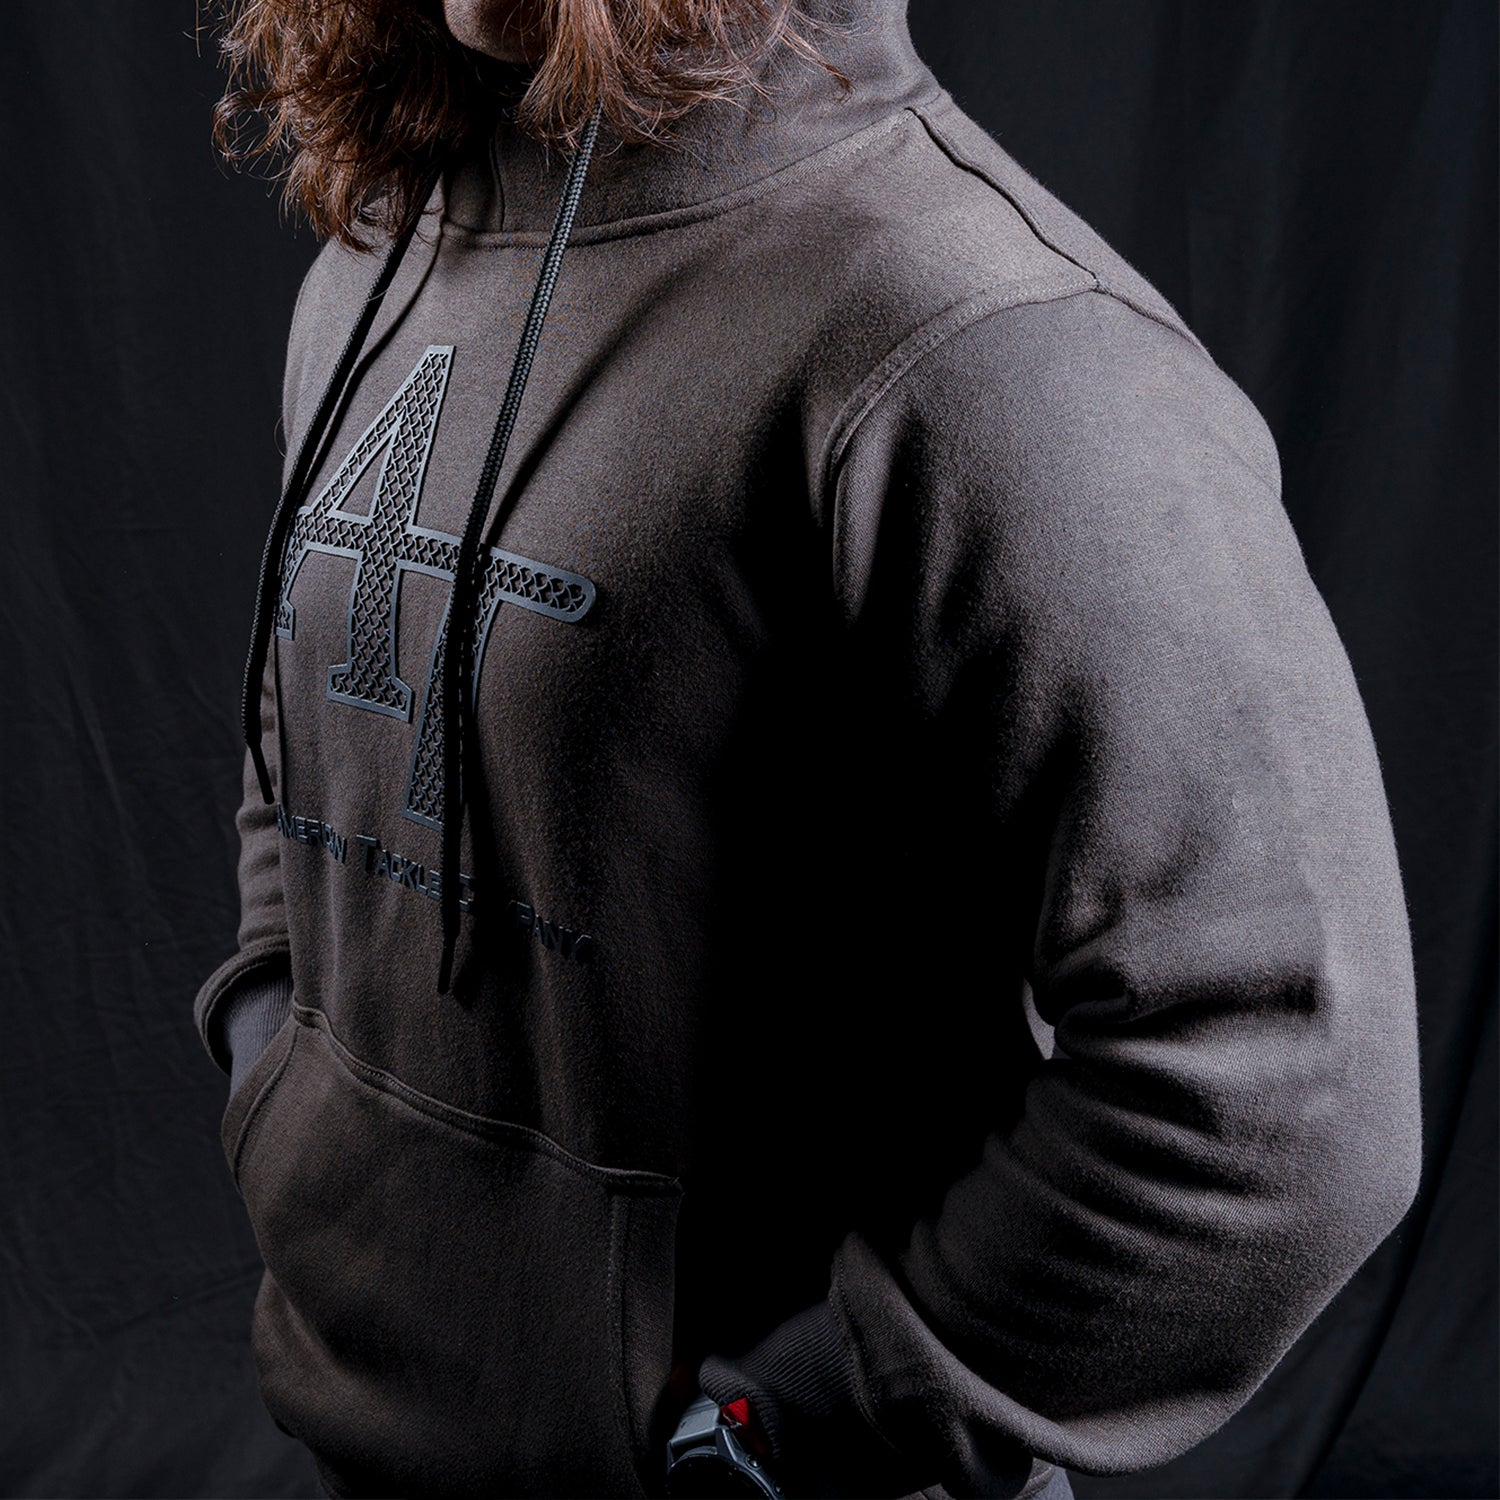 AT Scales Hoodie - Charcoal Gray